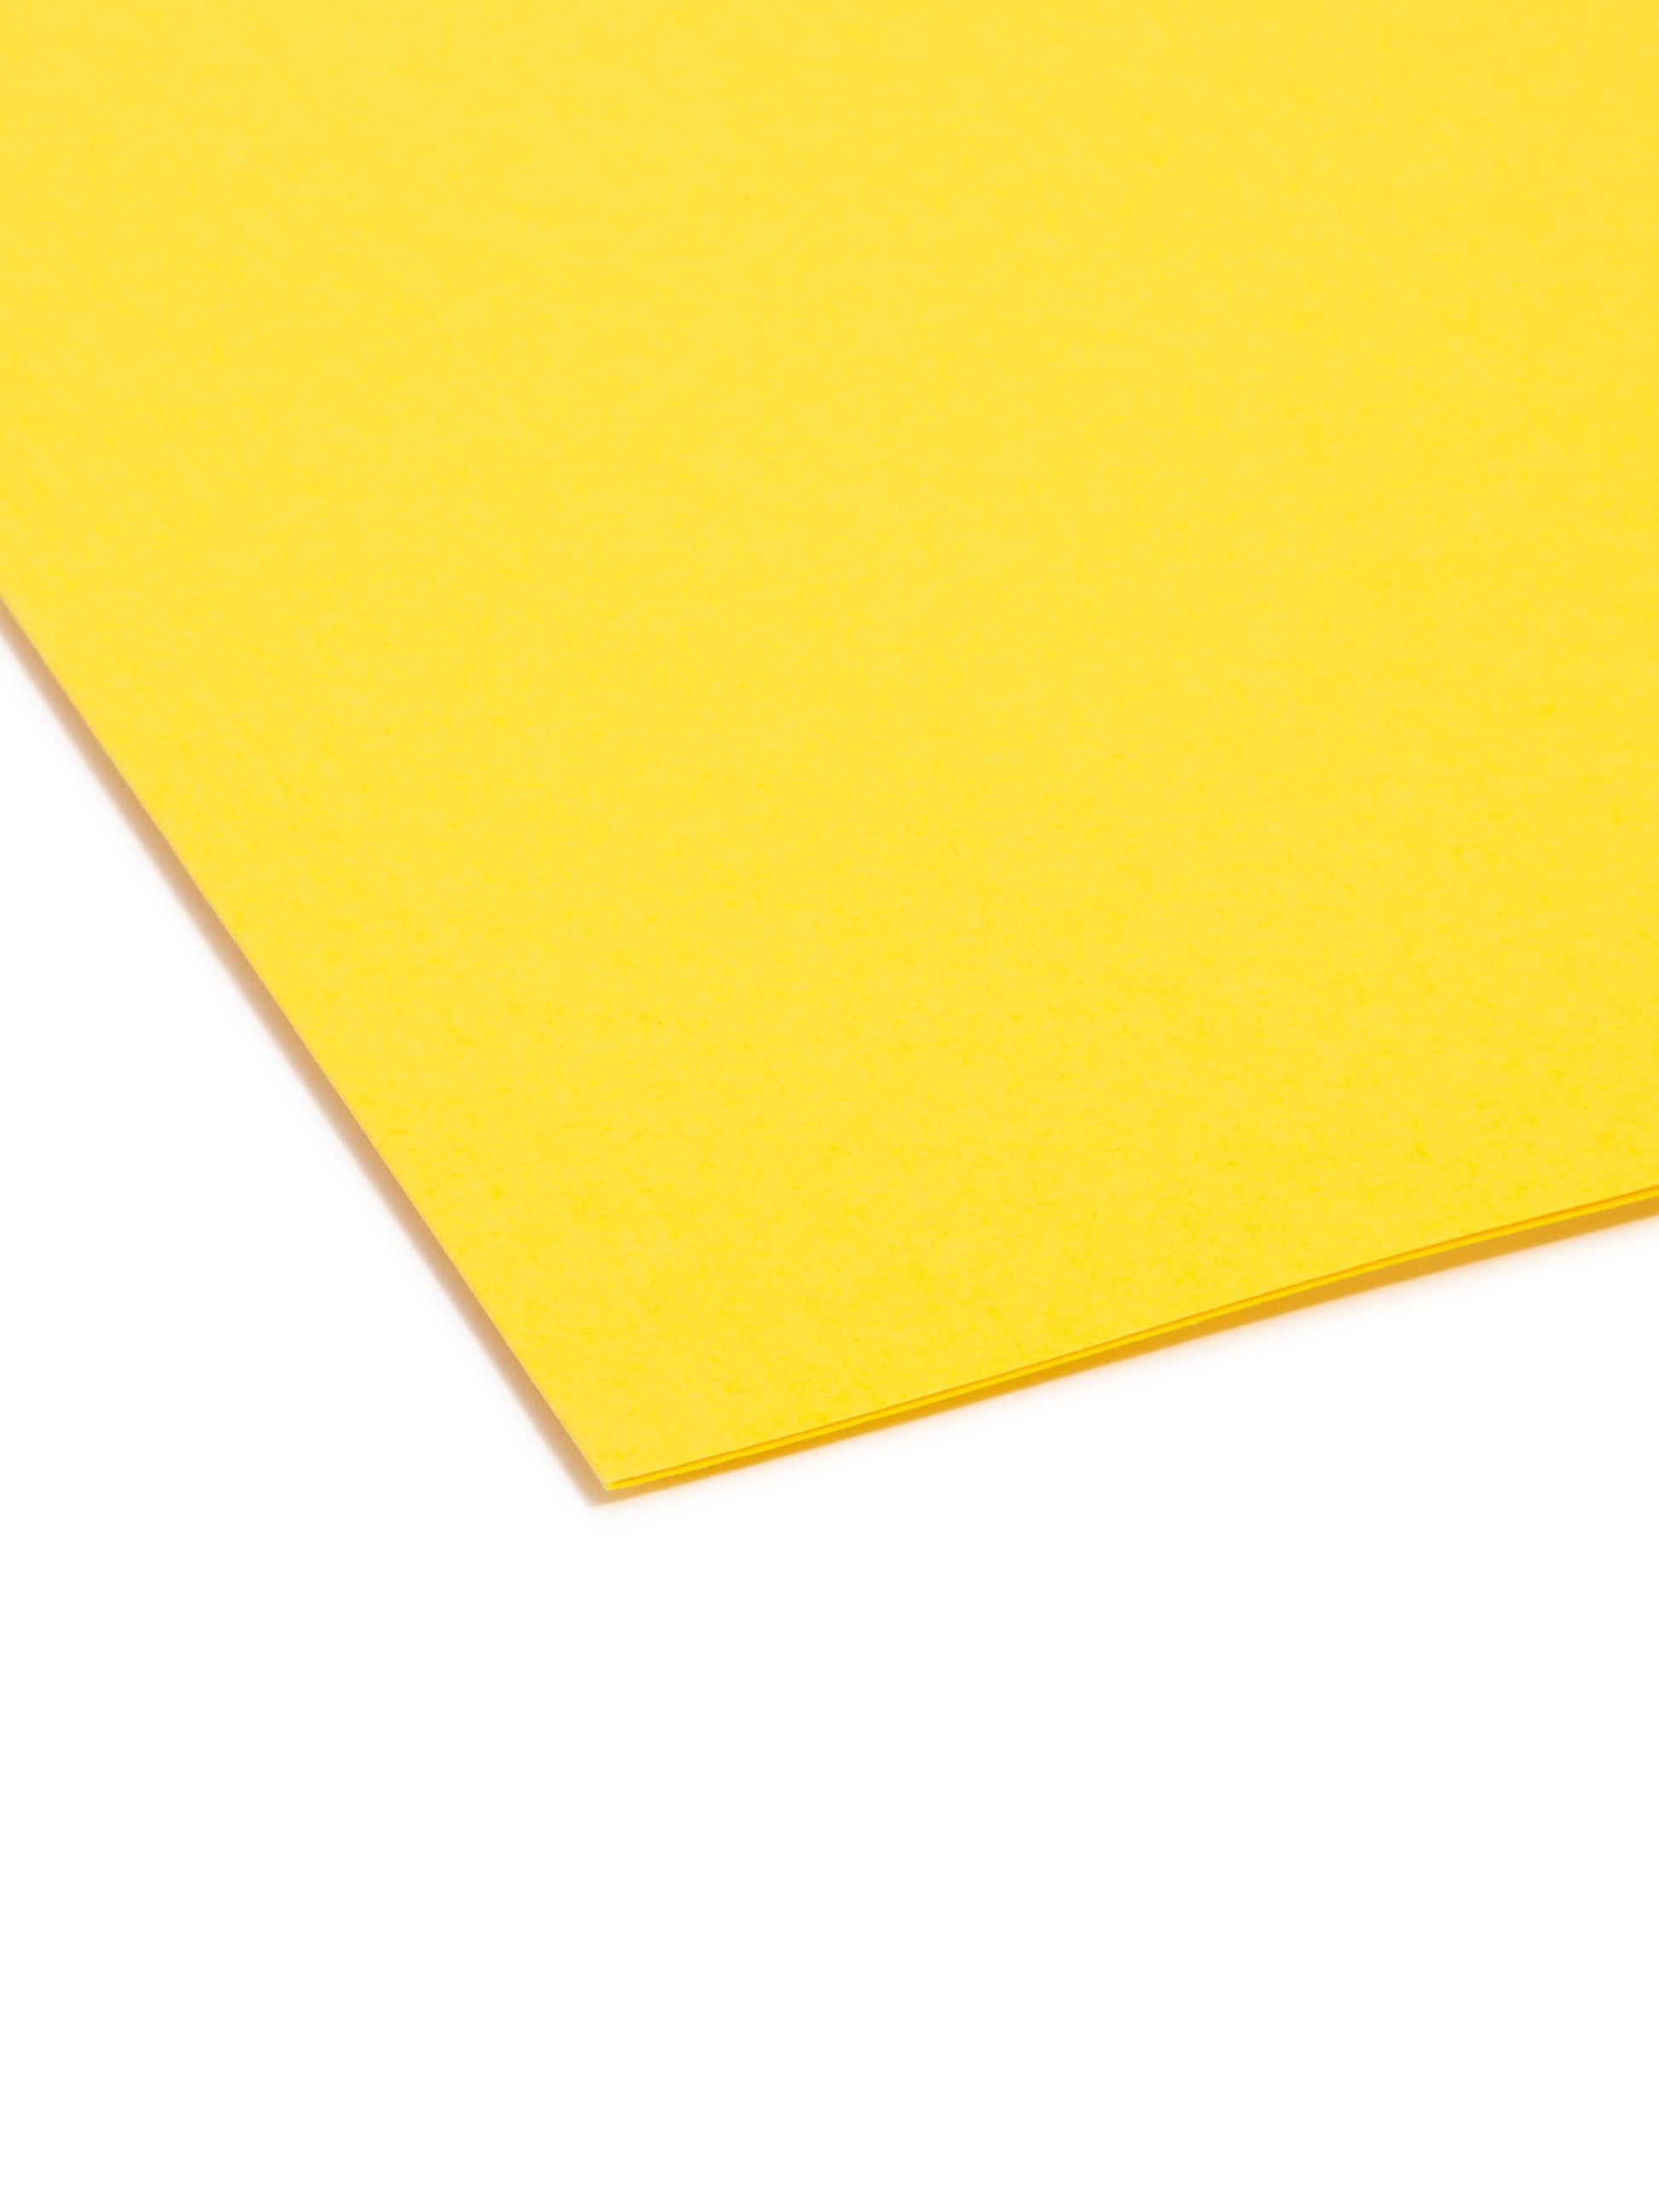 Standard Hanging File Folders with 1/5-Cut Tabs, Yellow Color, Legal Size, Set of 25, 086486641692